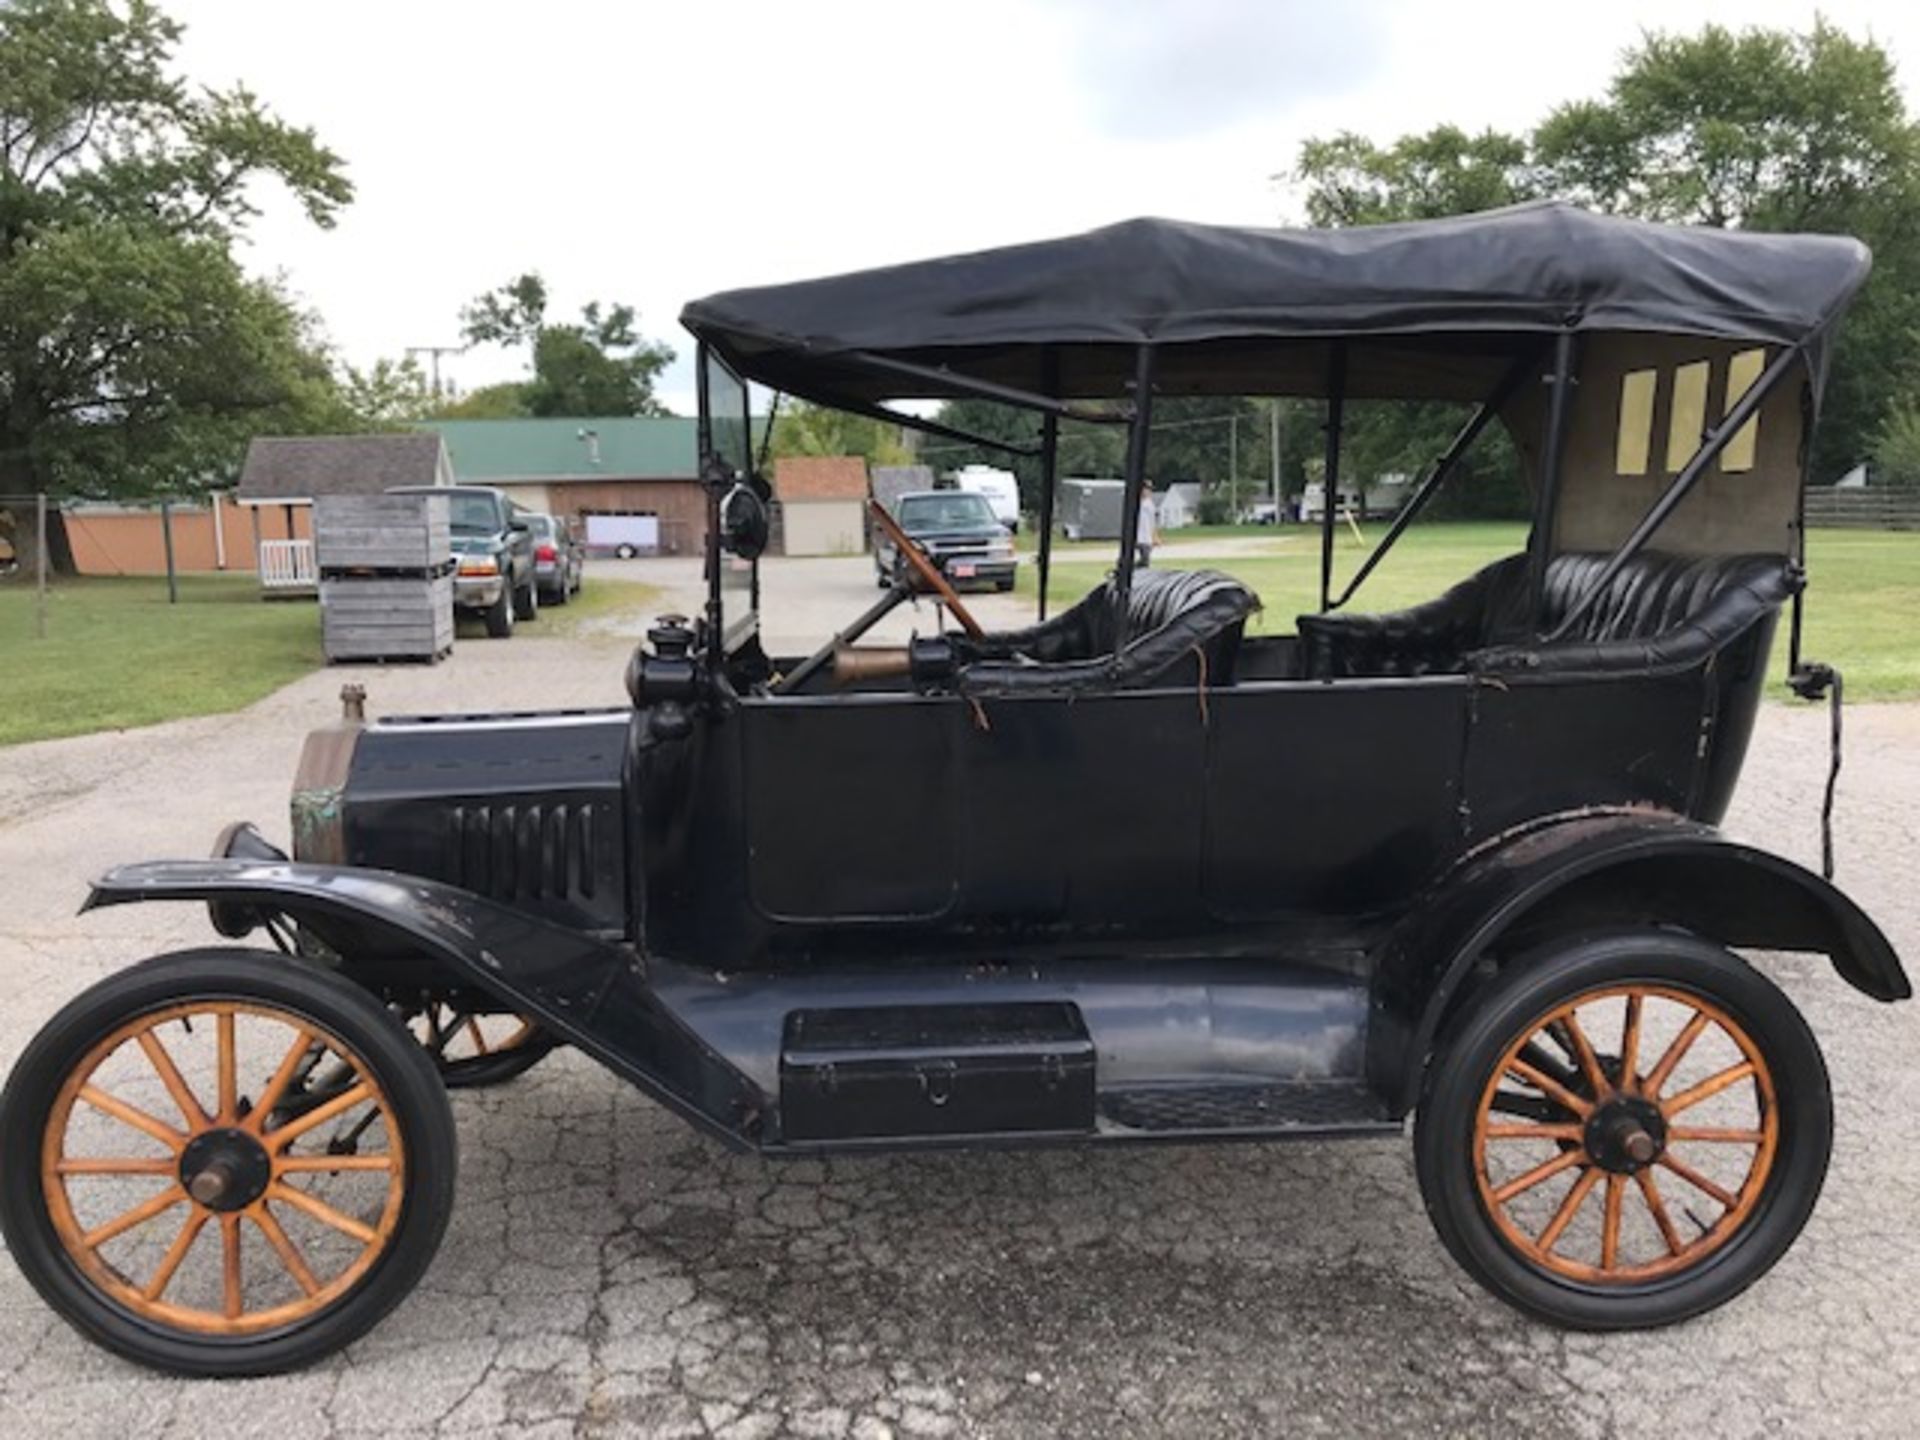 1914 Ford Model T Touring Auto, believed to be original roof and paint, ran approx. 10 years ago - Image 3 of 6